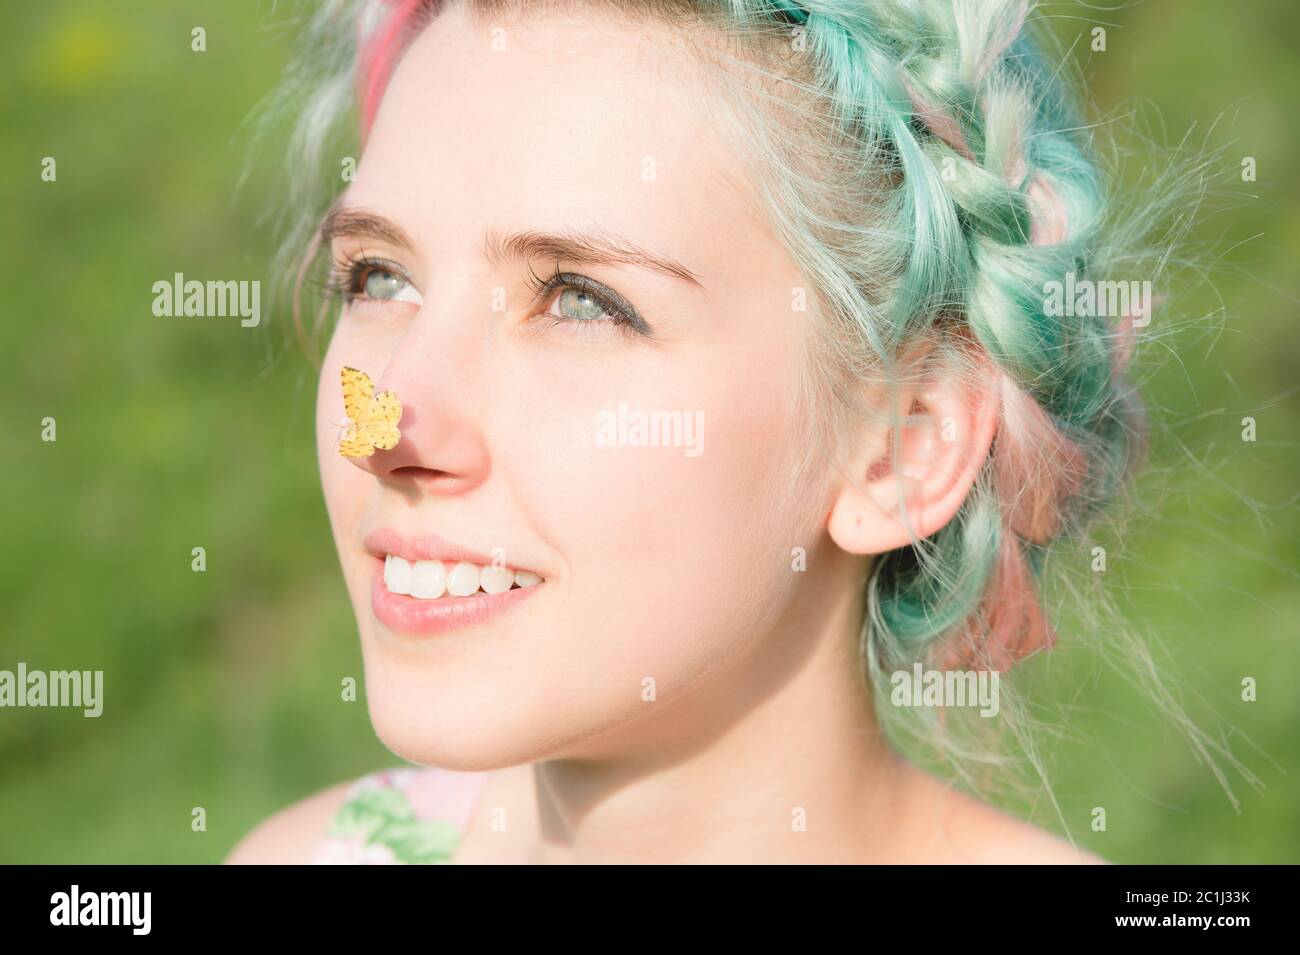 Yellow butterfly sitting on the nose Cute young girl on nature. Harmony and enjoyment in nature Stock Photo